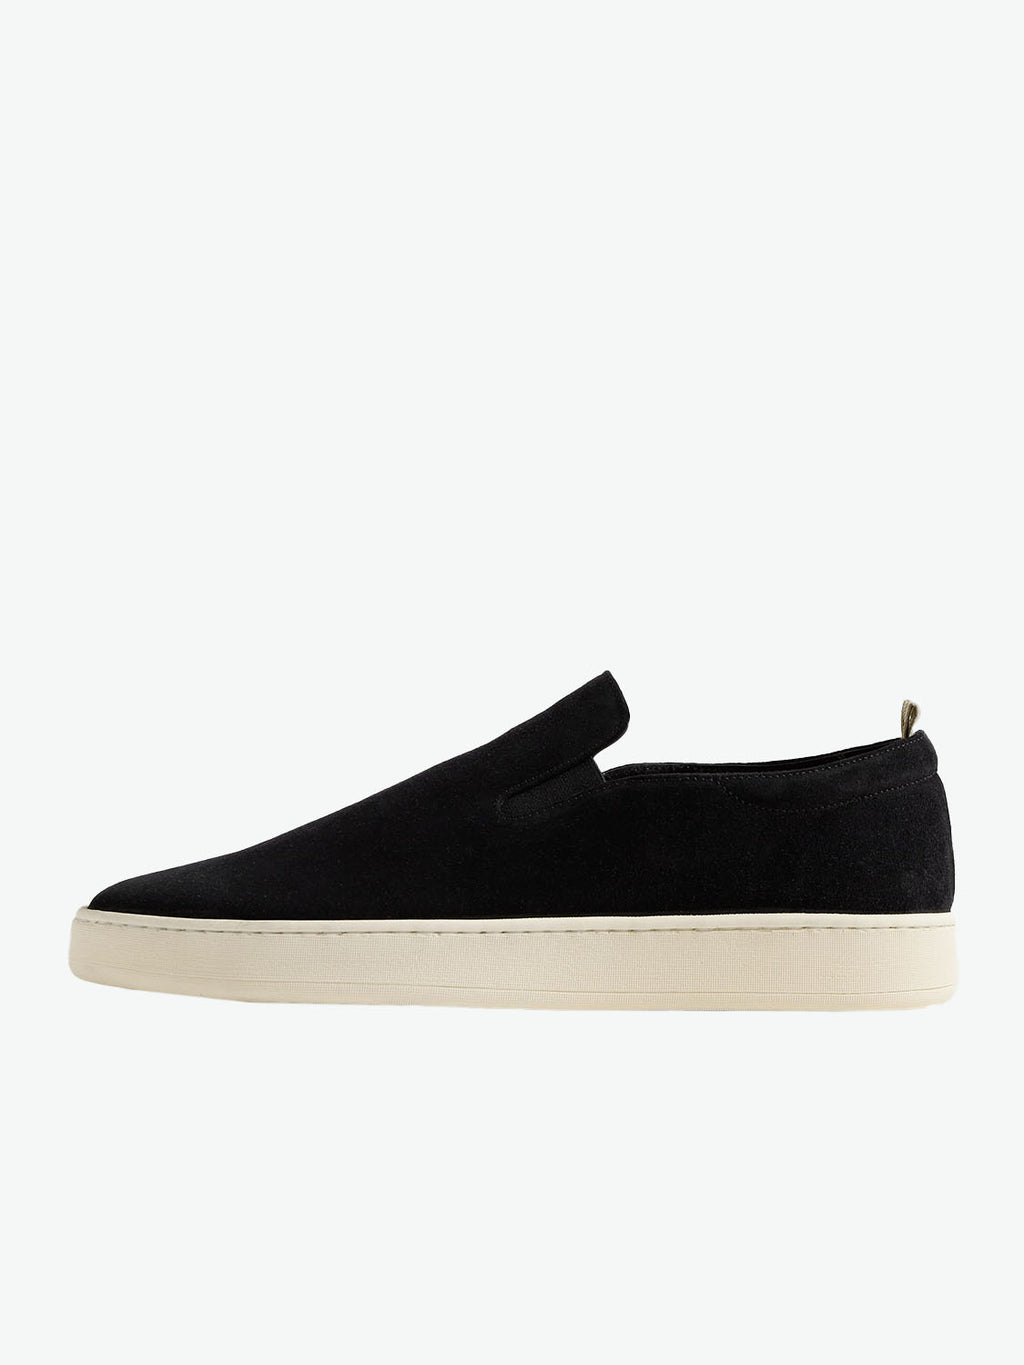 Officine Creative Once Suede Slip-on Sneakers Black